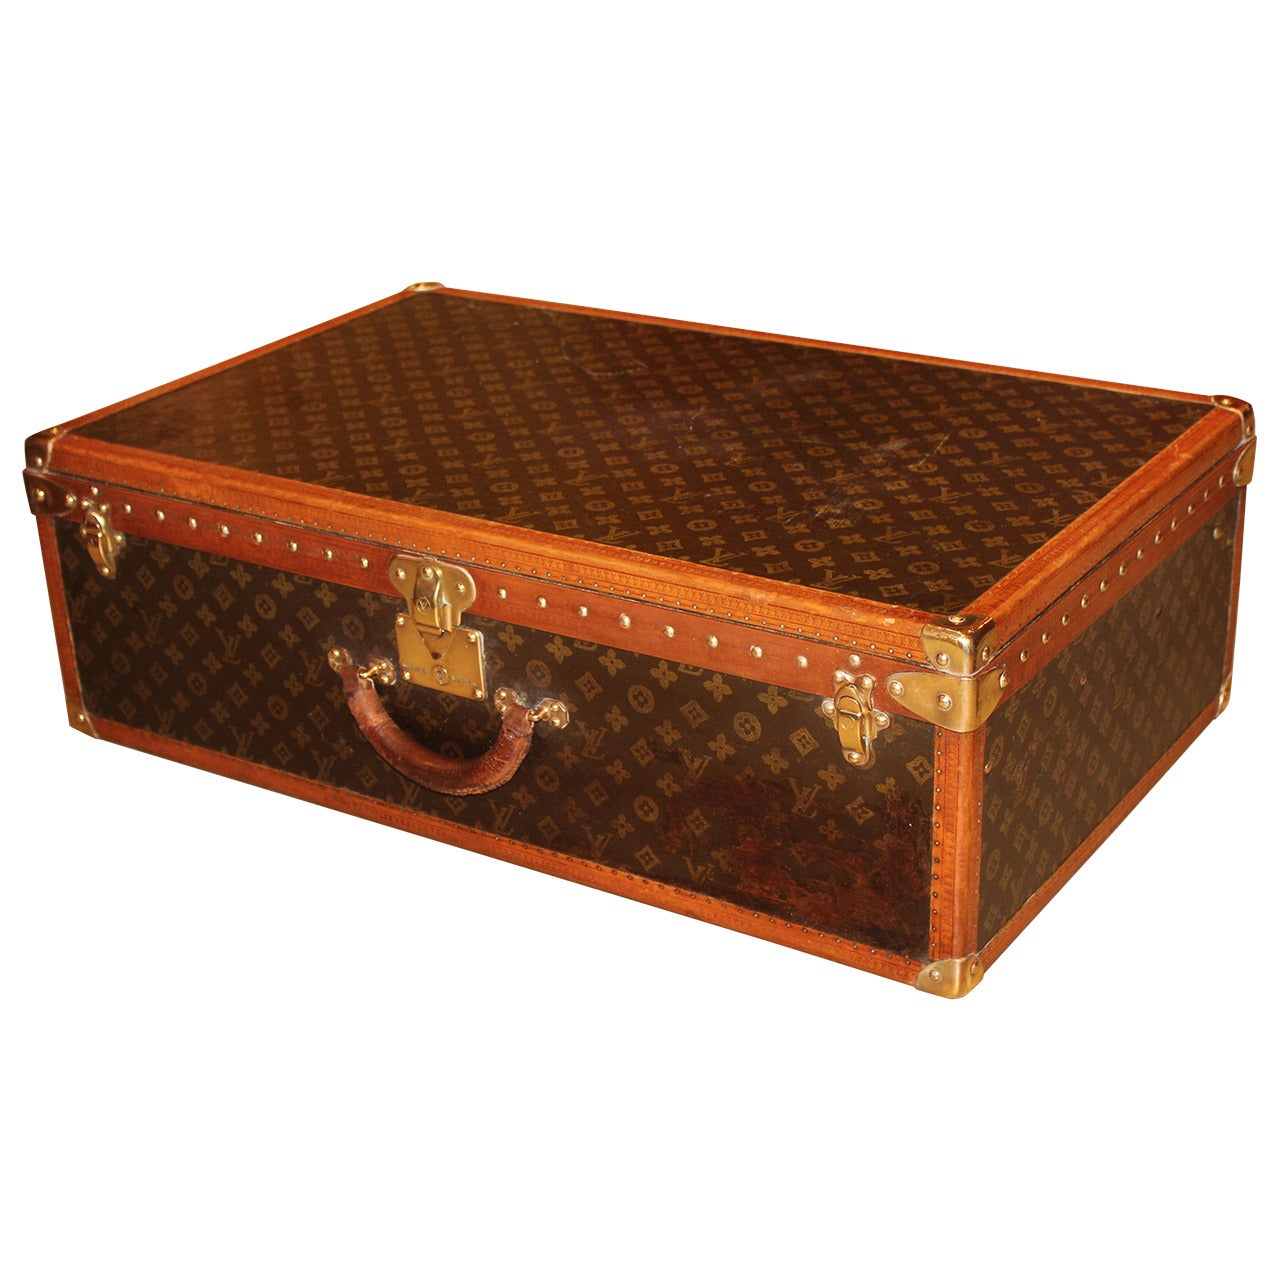 Louis Vuitton Hardside Luggage Suitcase with Interior Tray and Key, circa 1950s